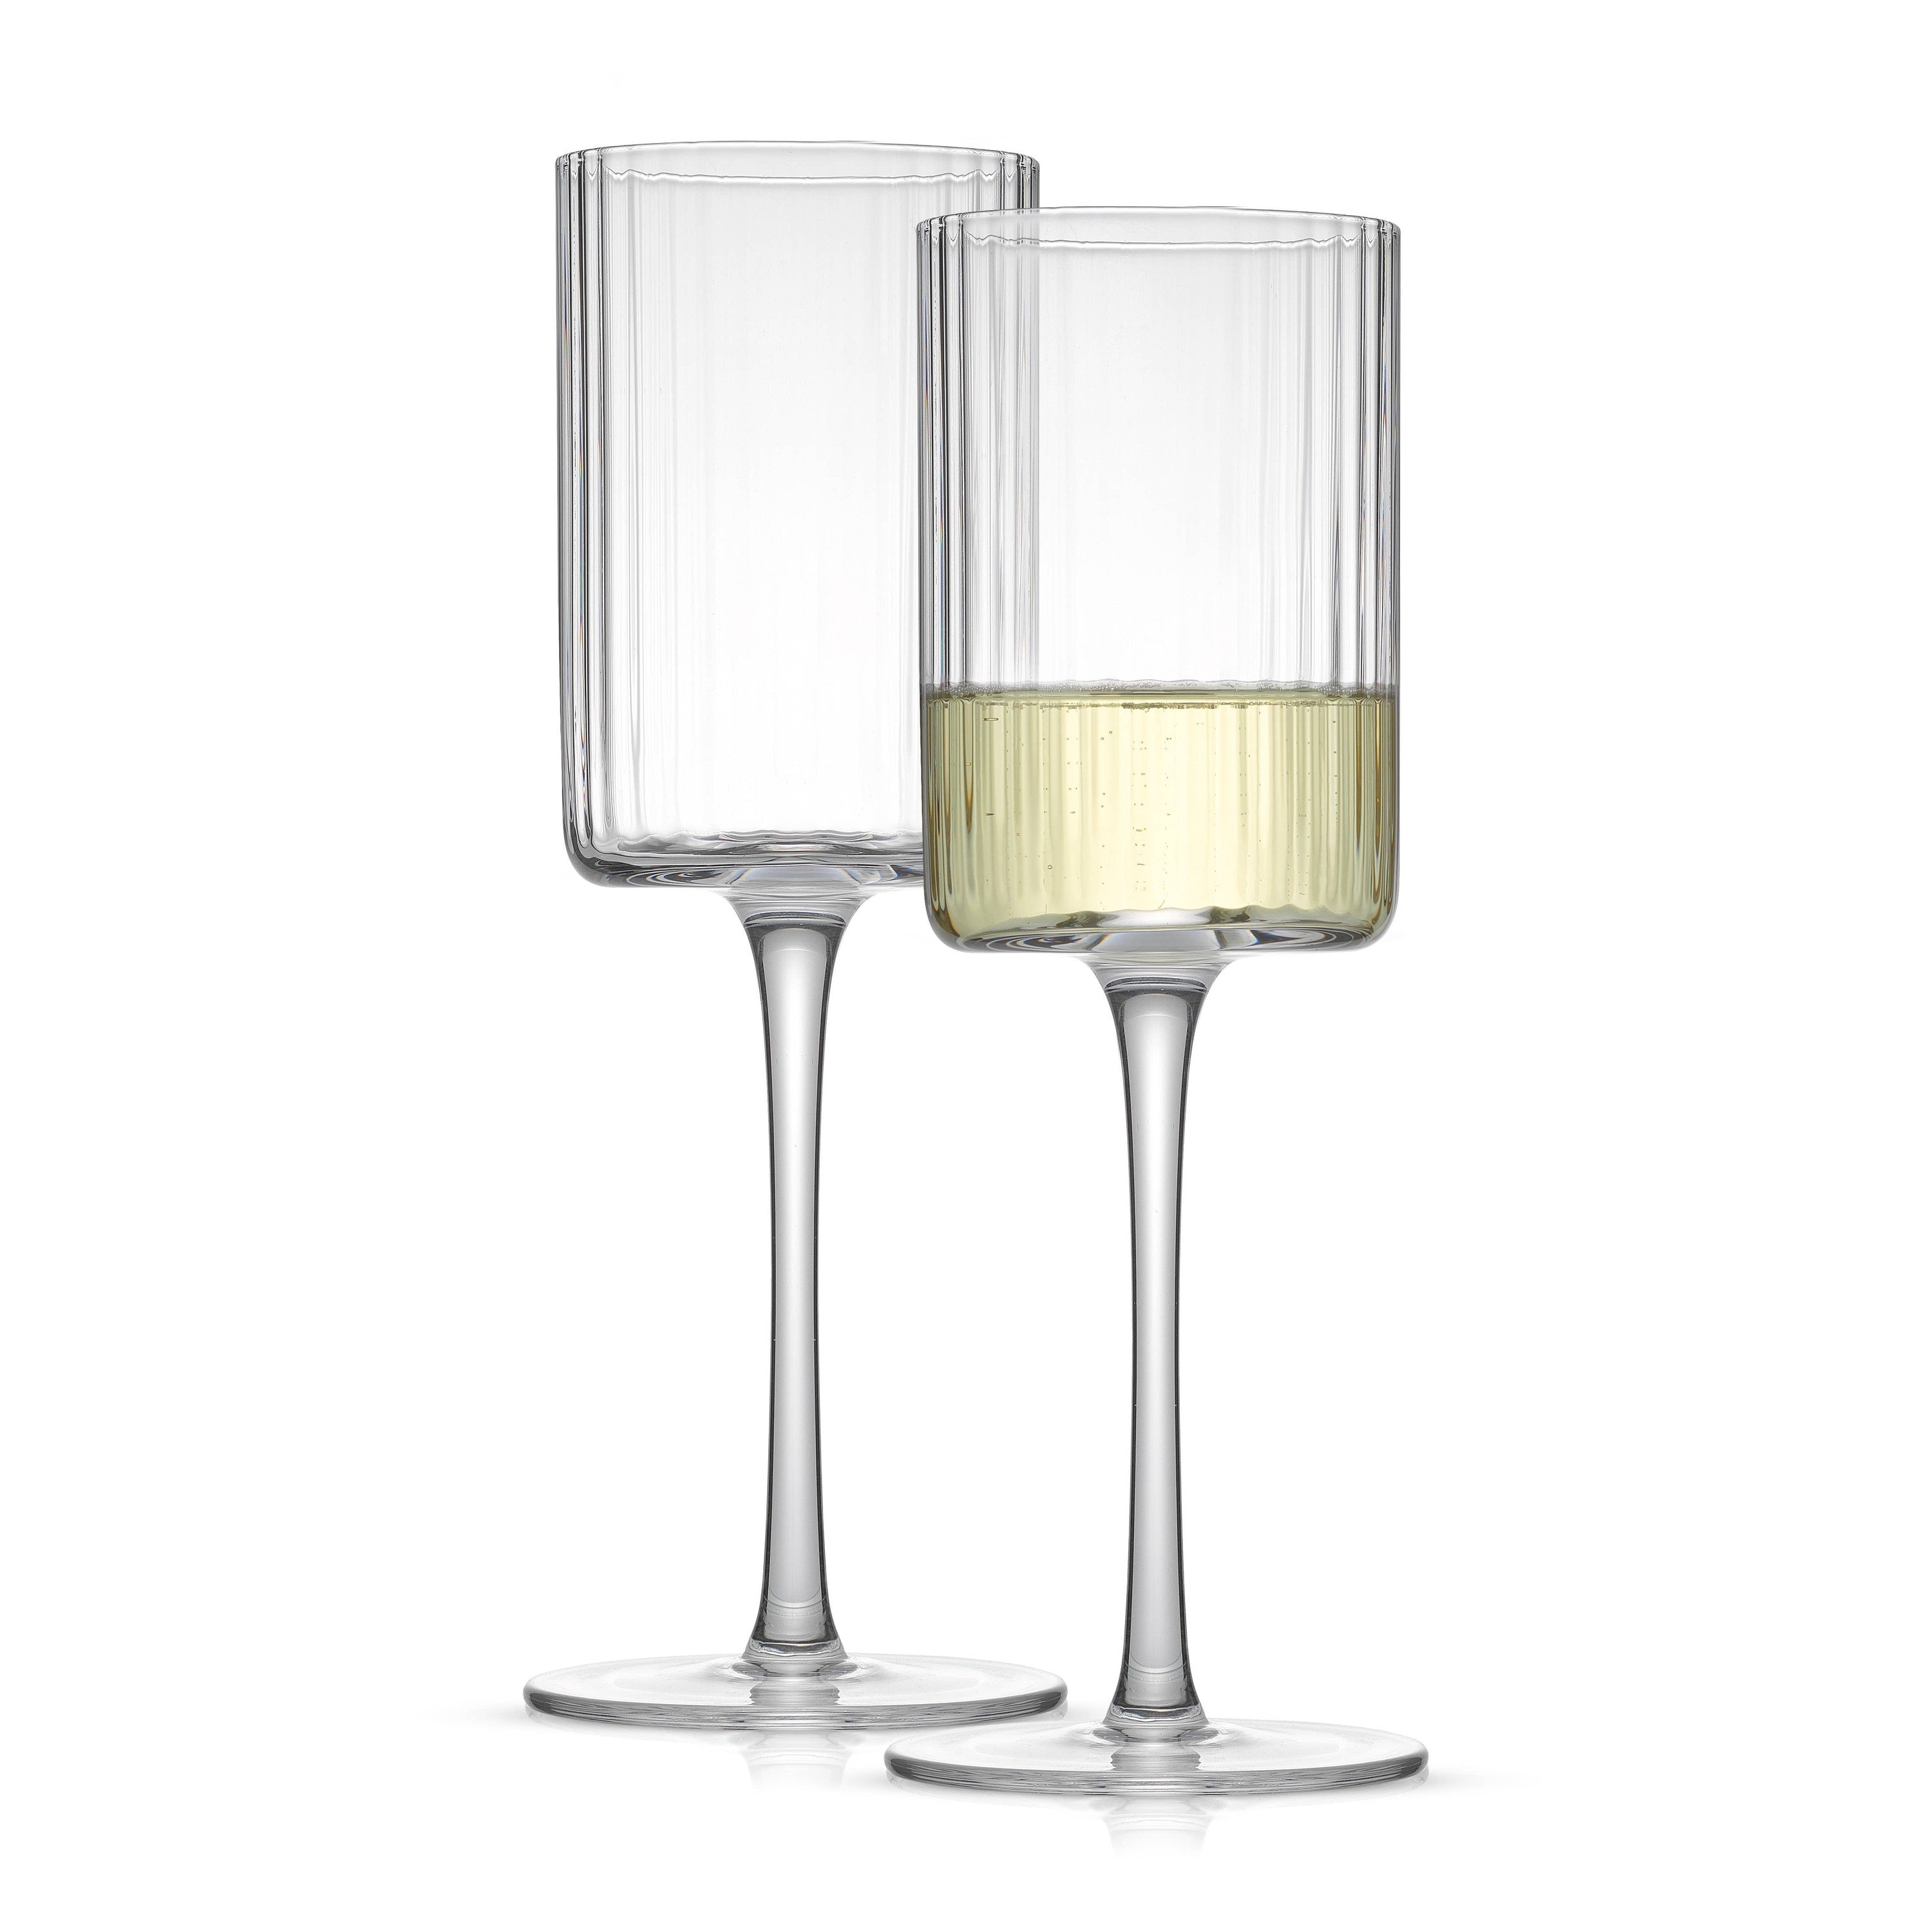 Iridescent Toasting Flutes with Crystal-Filled Stems